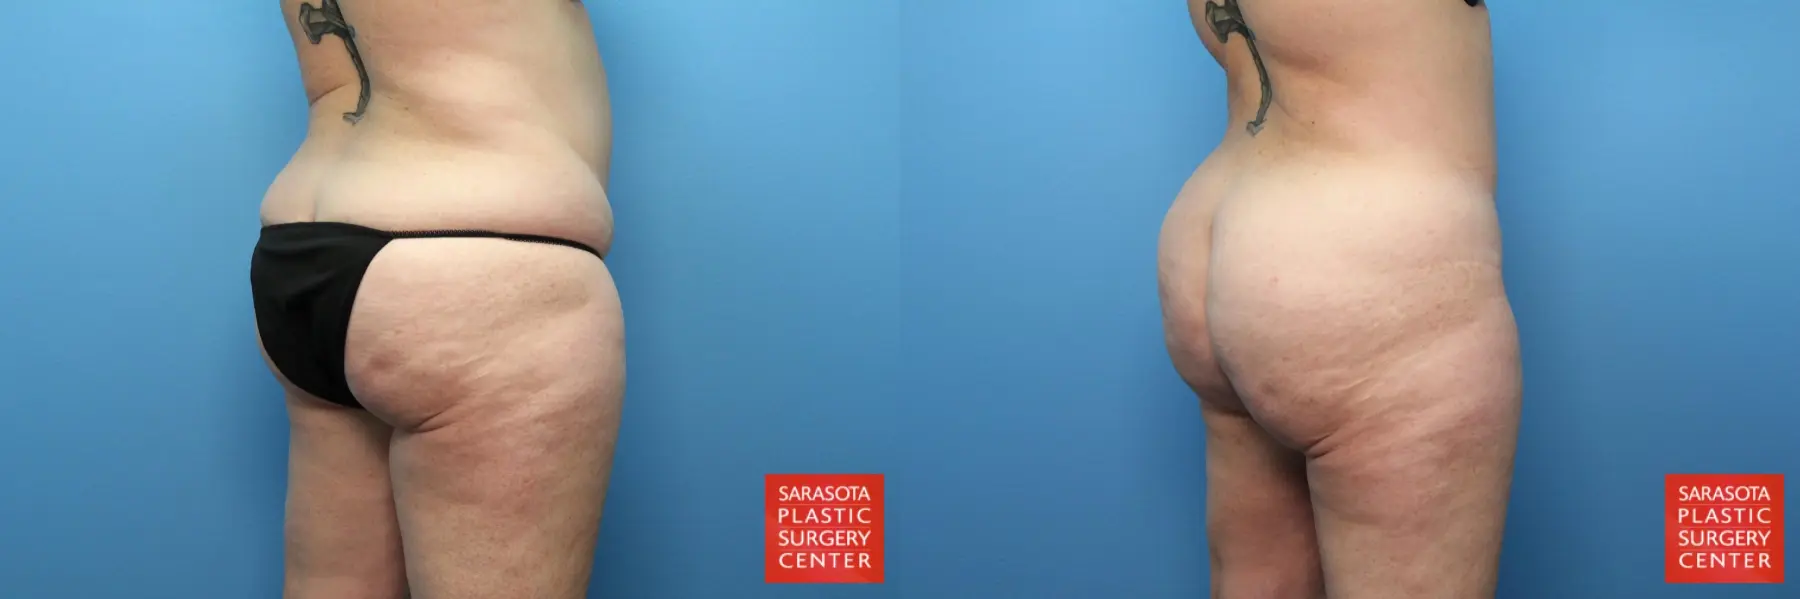 Liposuction: Patient 3 - Before and After 5